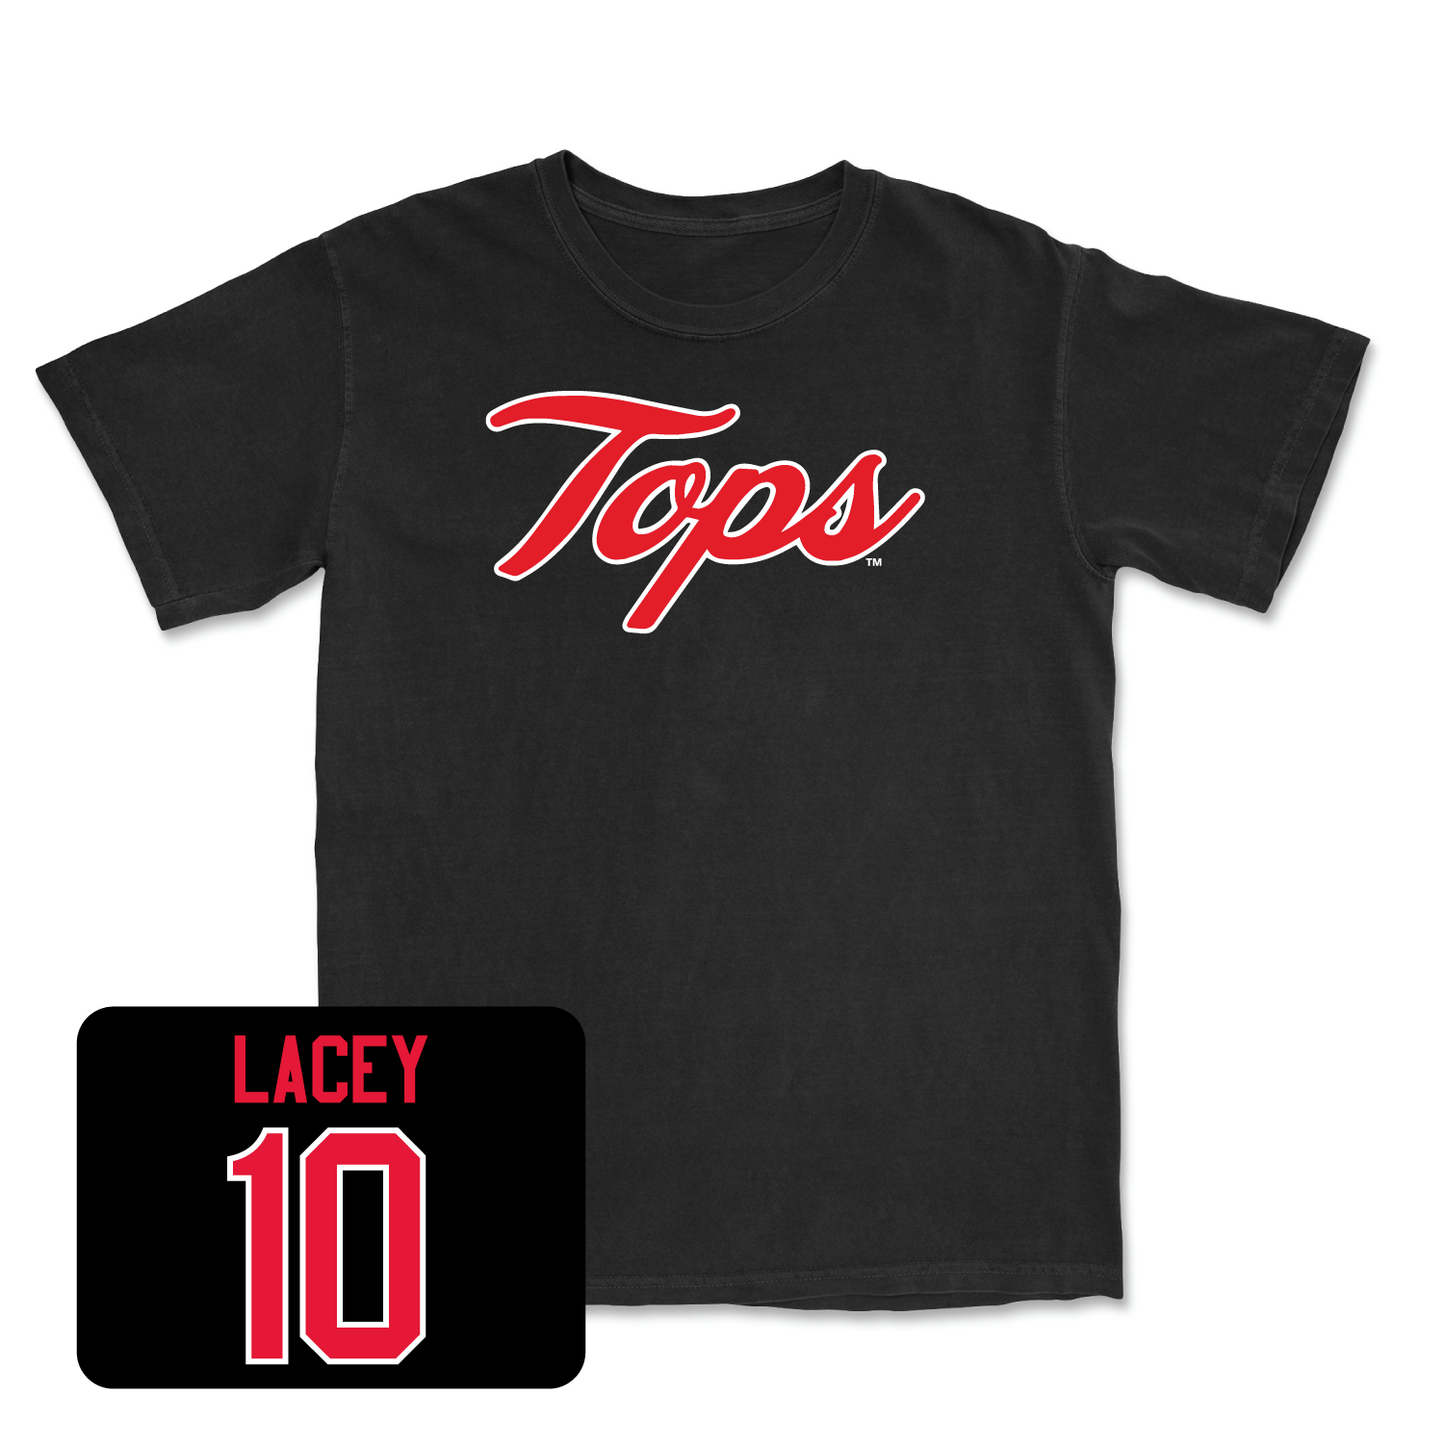 Black Women's Soccer Tops Tee 3 Youth Medium / Paige Lacey | #10